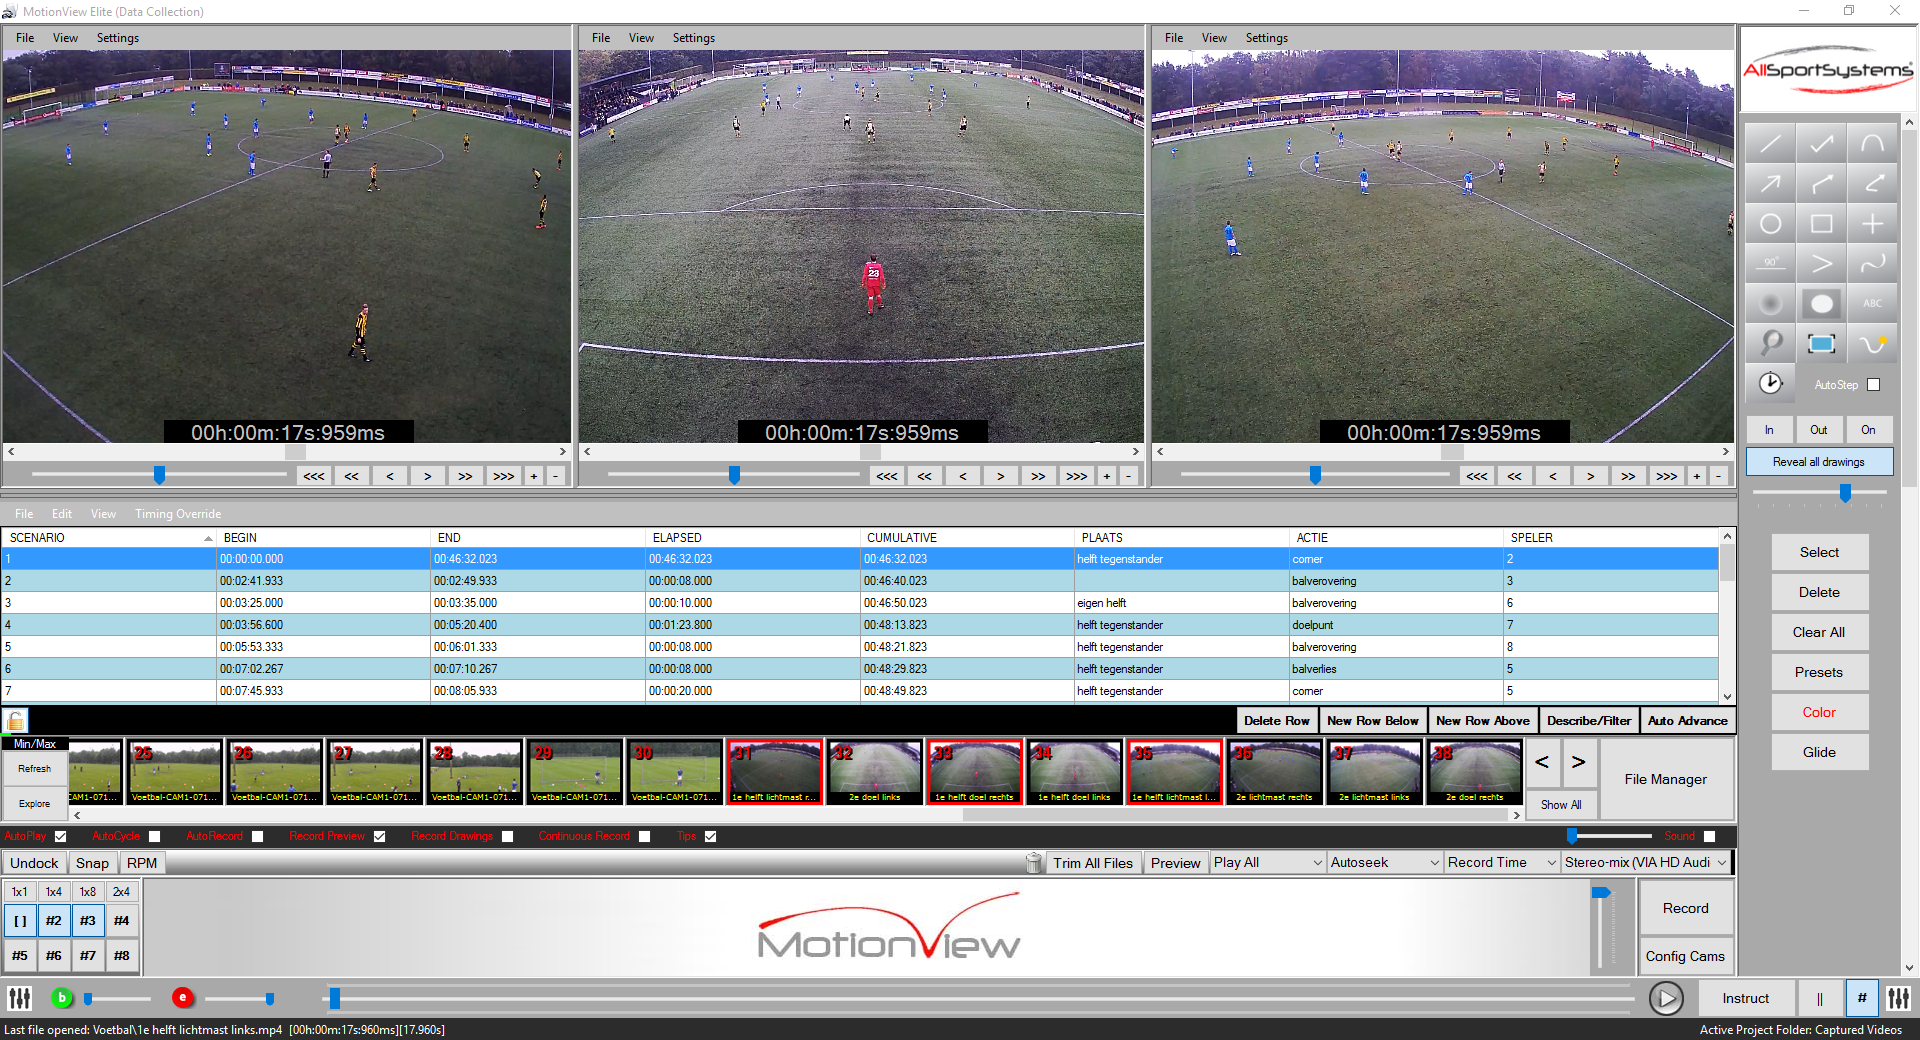 MotionView - Voetball-Soccer - Video Analyse Software